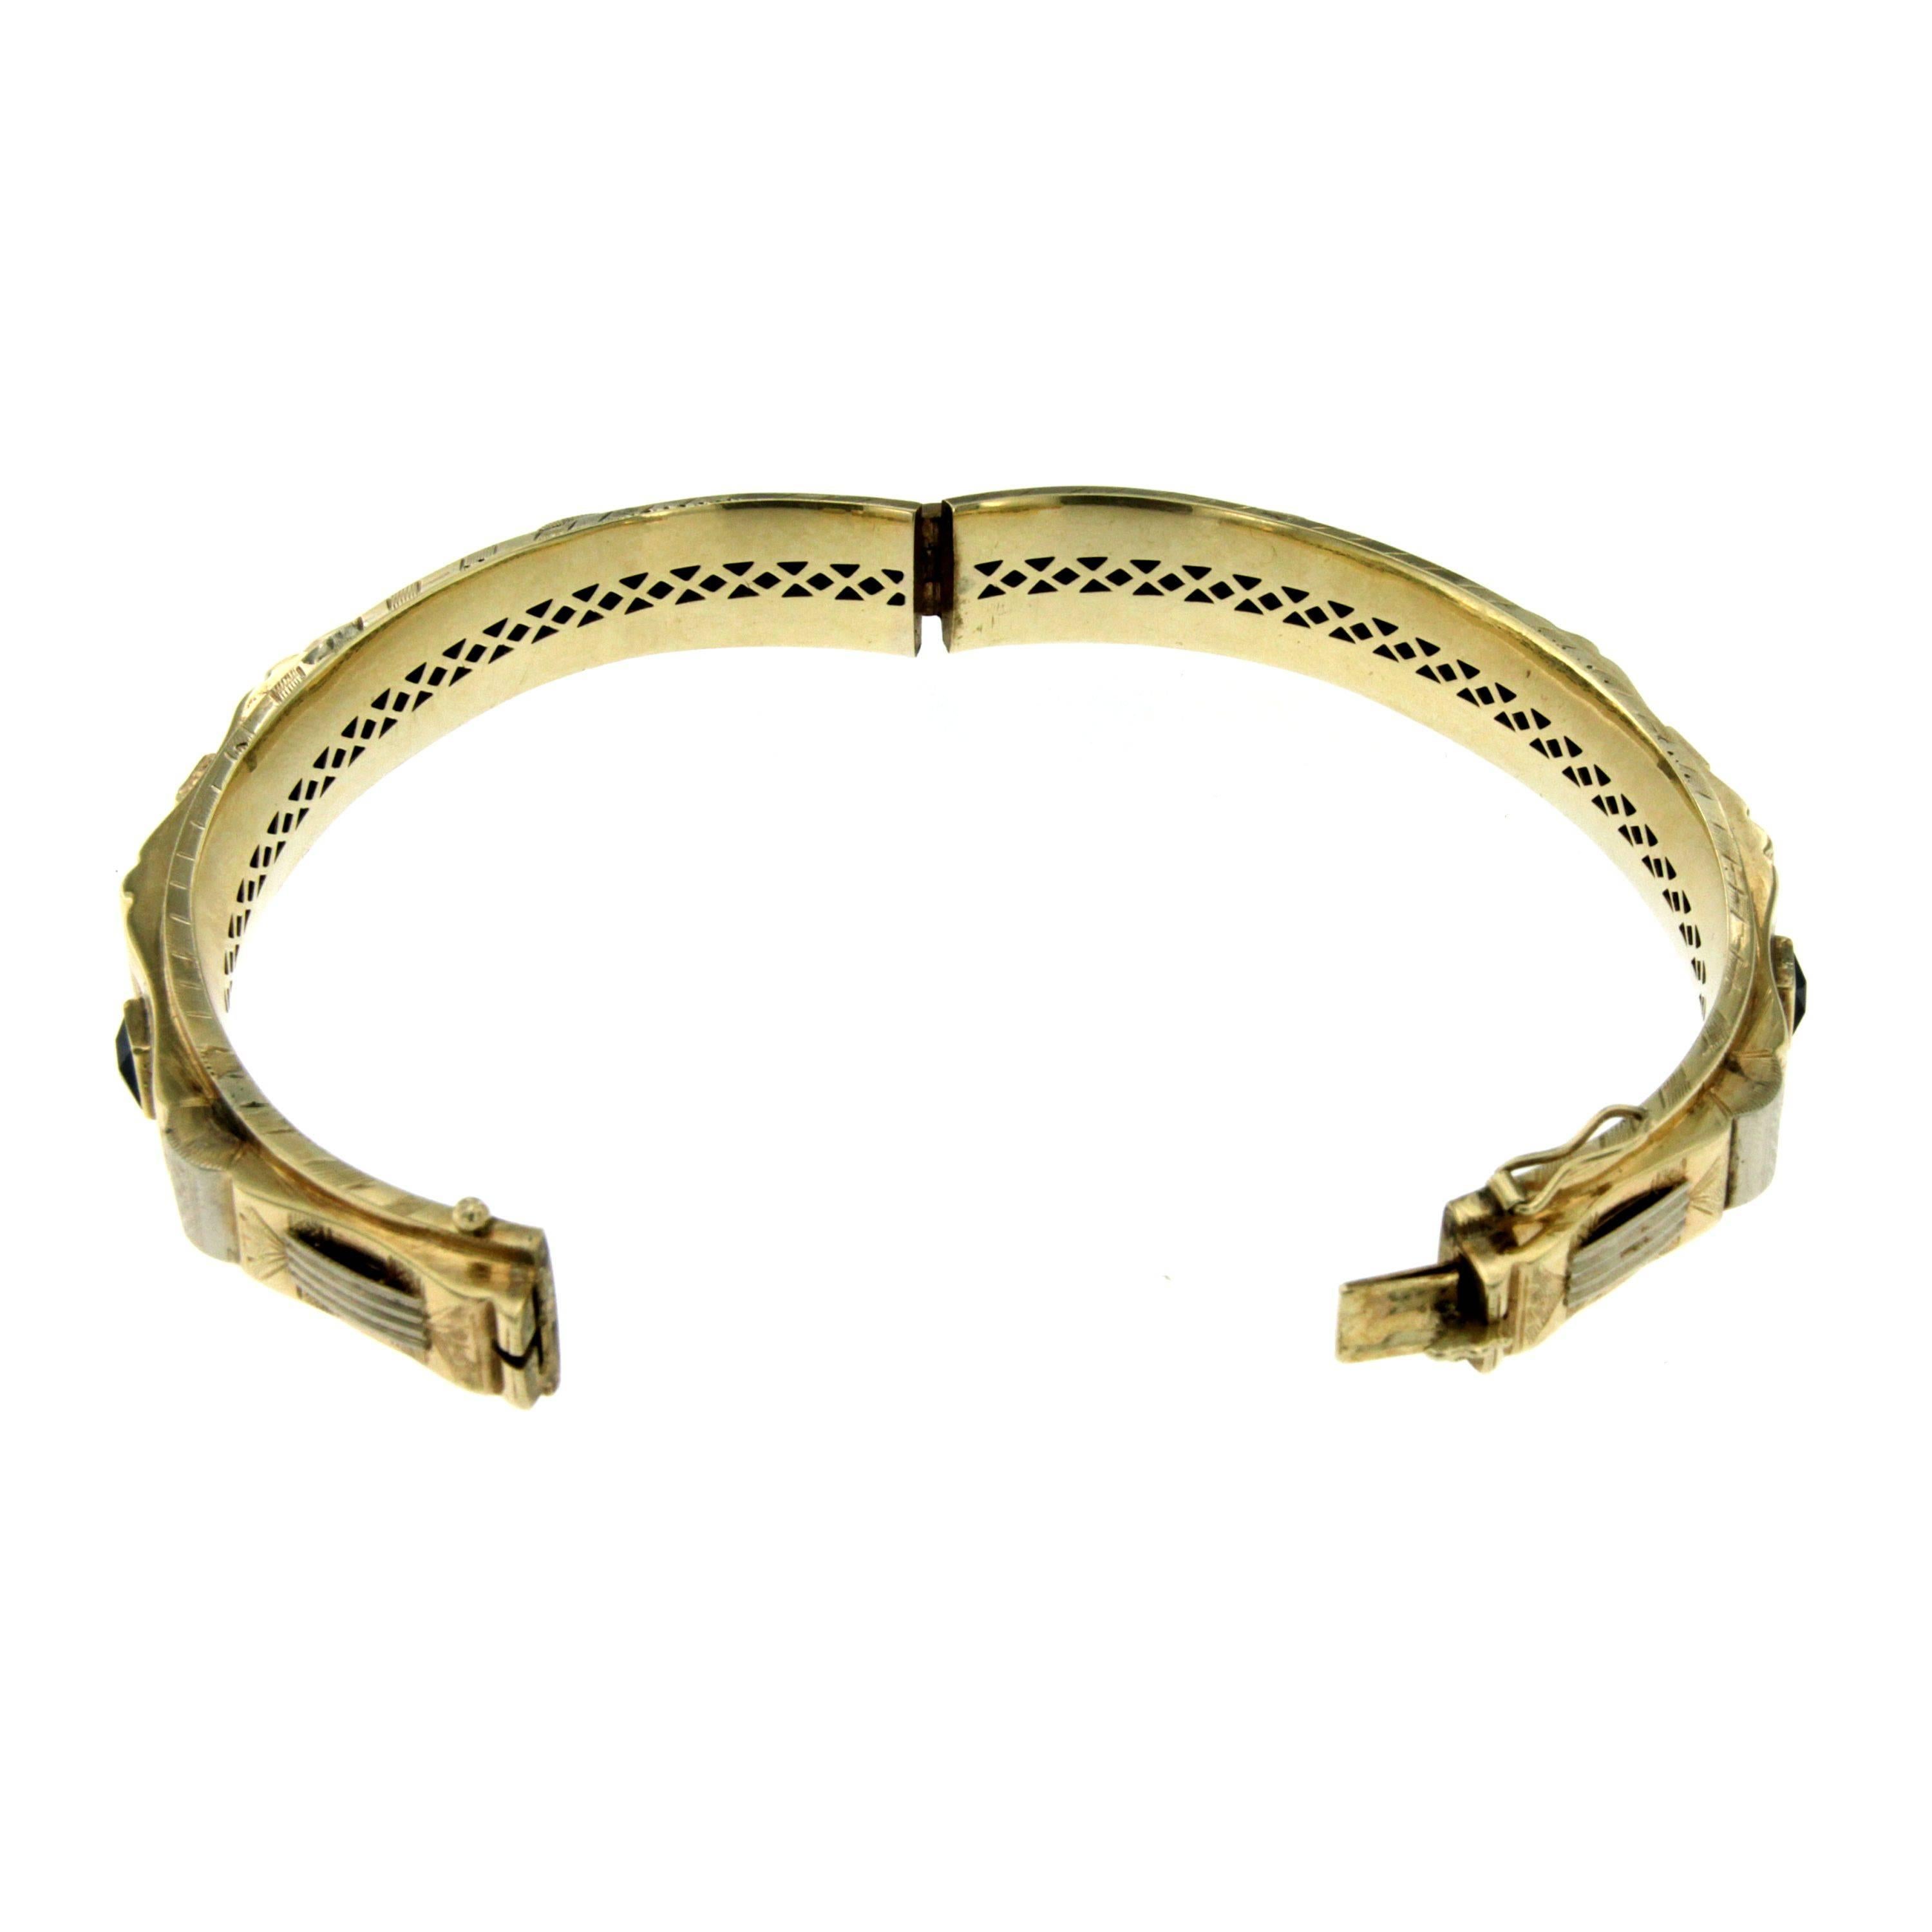 1930s Fasces Lictorii Gold Bangle Bracelet In Excellent Condition For Sale In Napoli, Italy